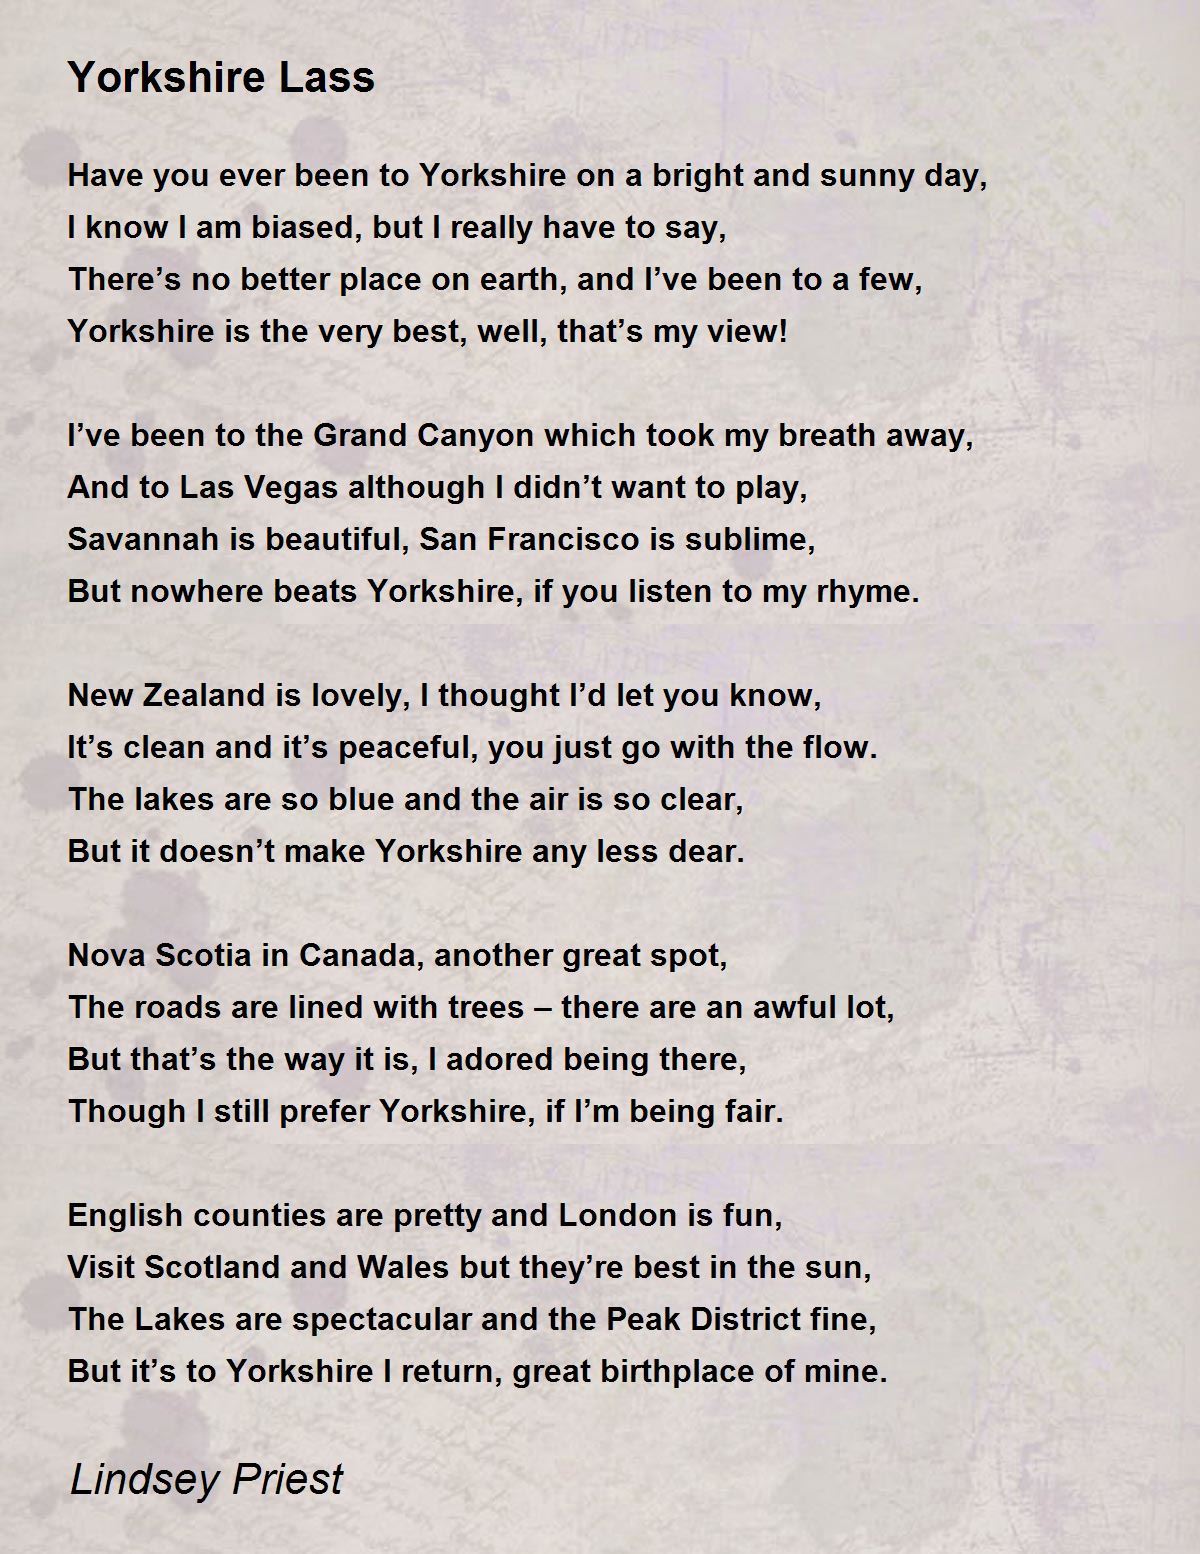 Yorkshire Lass Yorkshire Lass Poem By Lindsey Priest